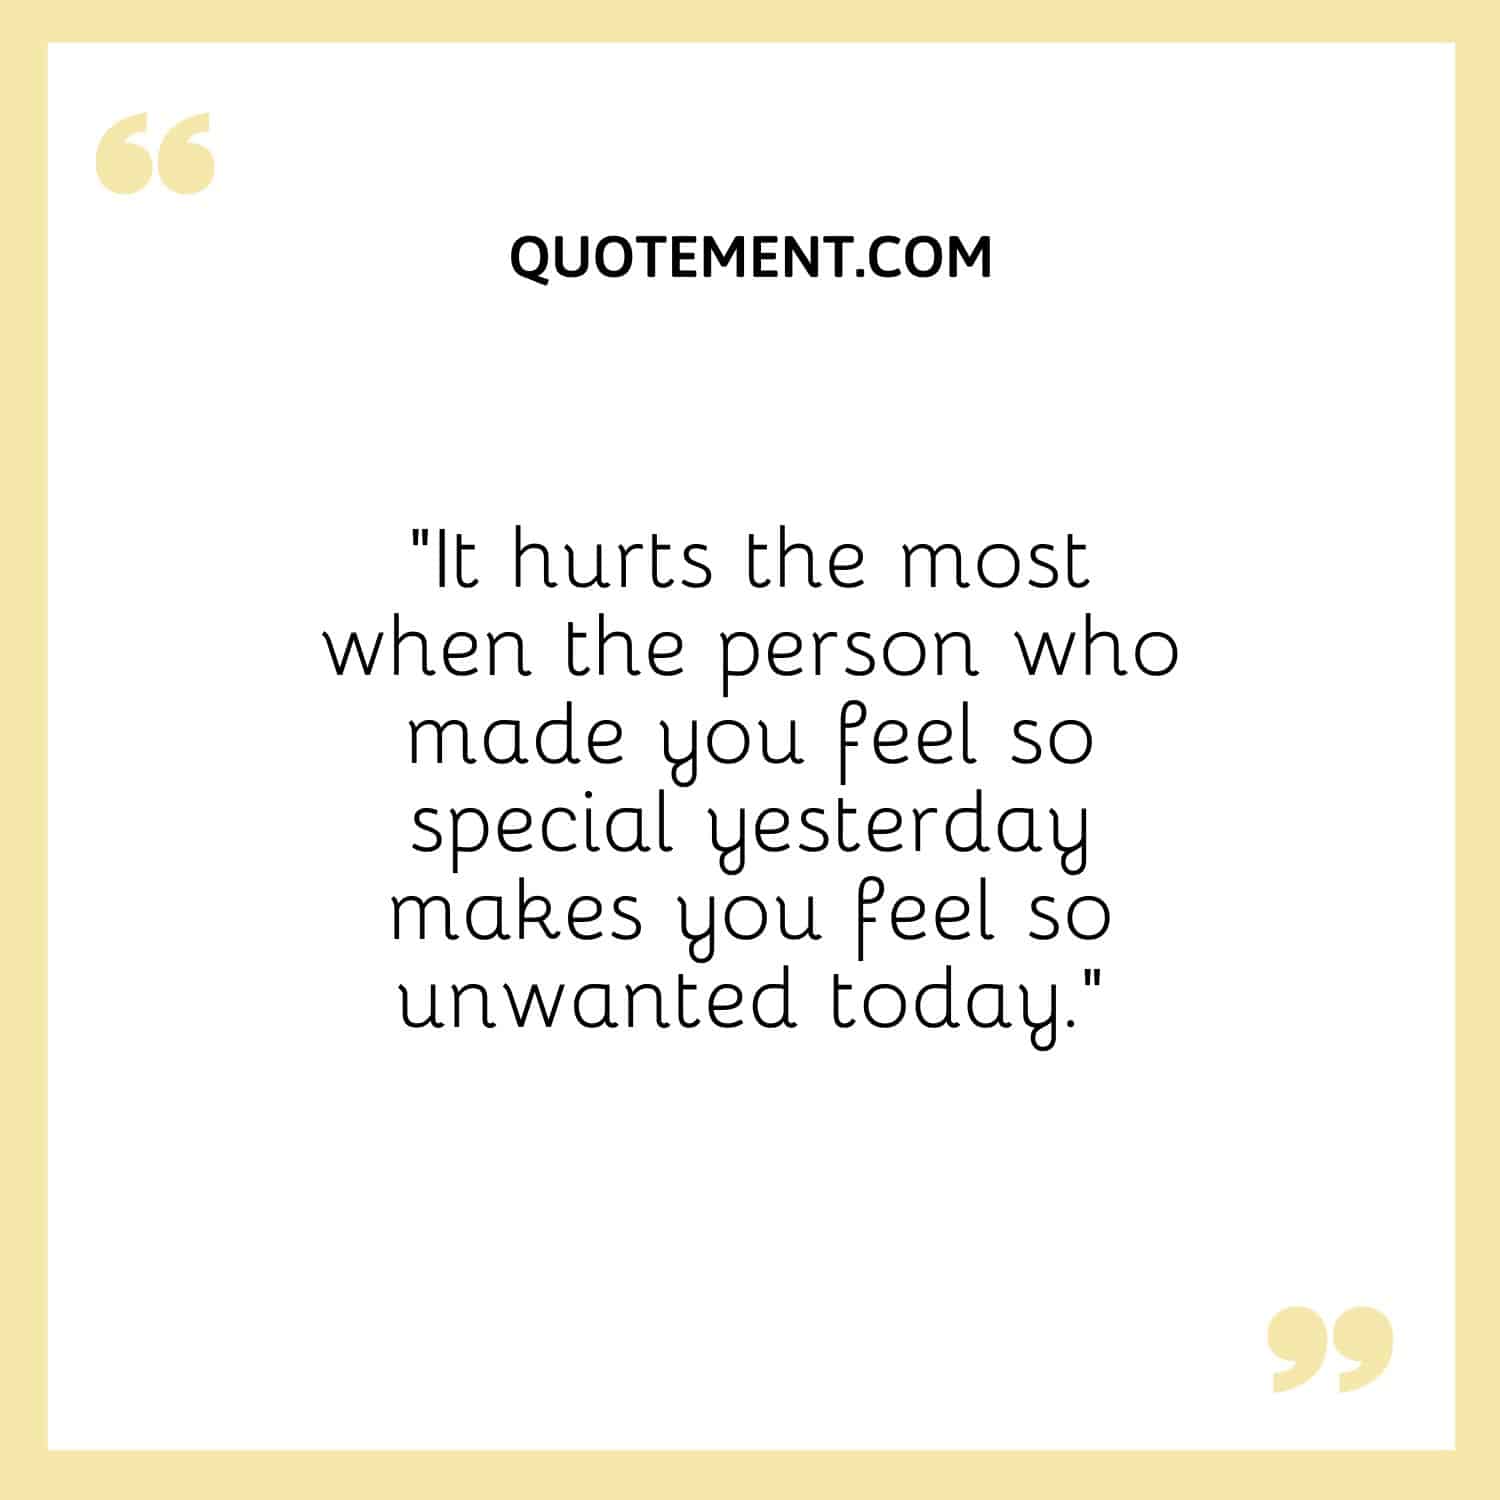 It hurts the most when the person who made you feel so special yesterday makes you feel so unwanted today